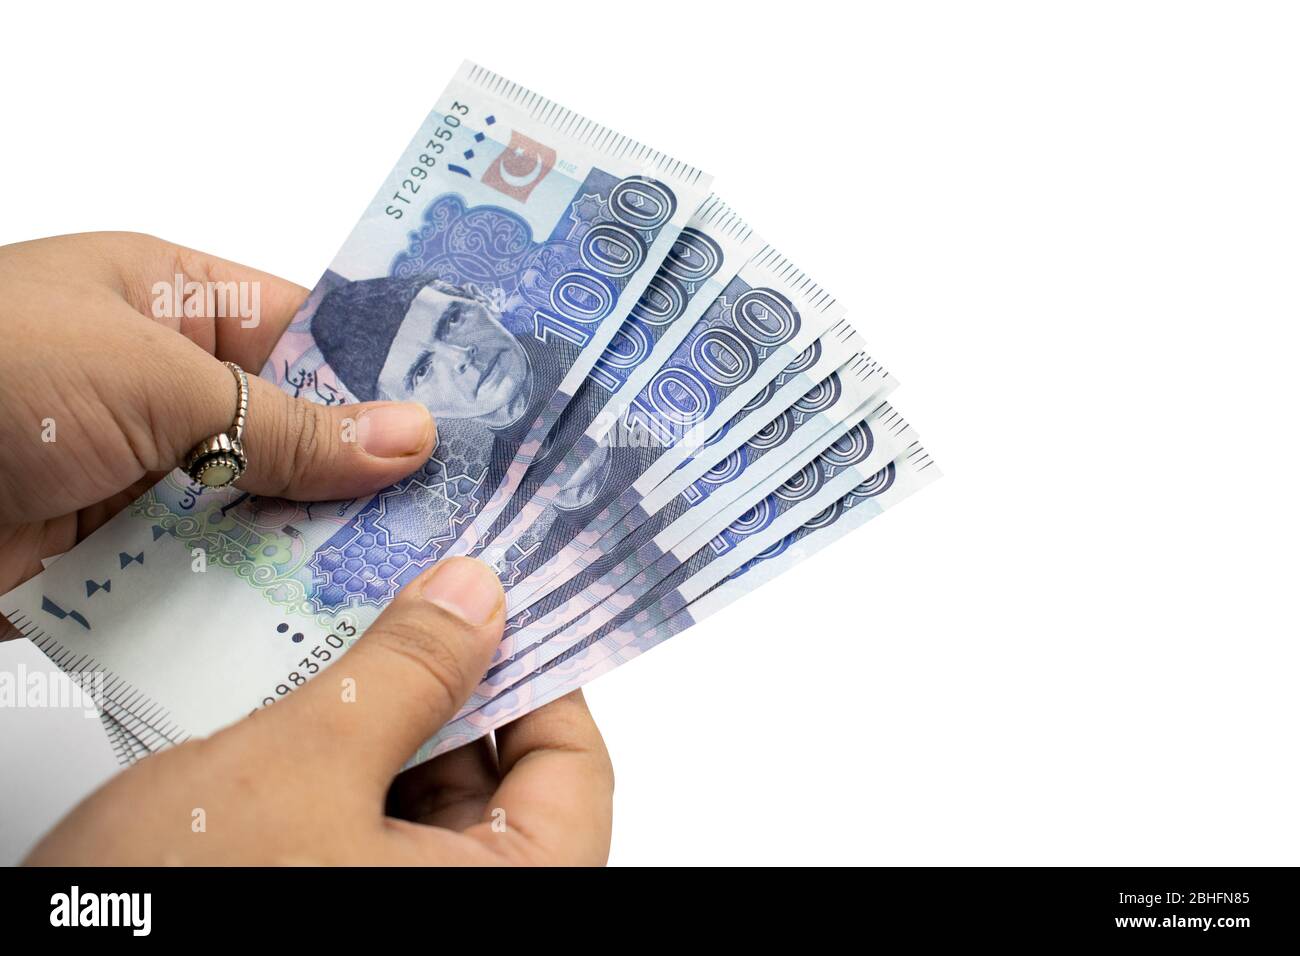 Pakistani Currency, Banknotes holding in hands, Pakistan Bank Rupees Stock Photo